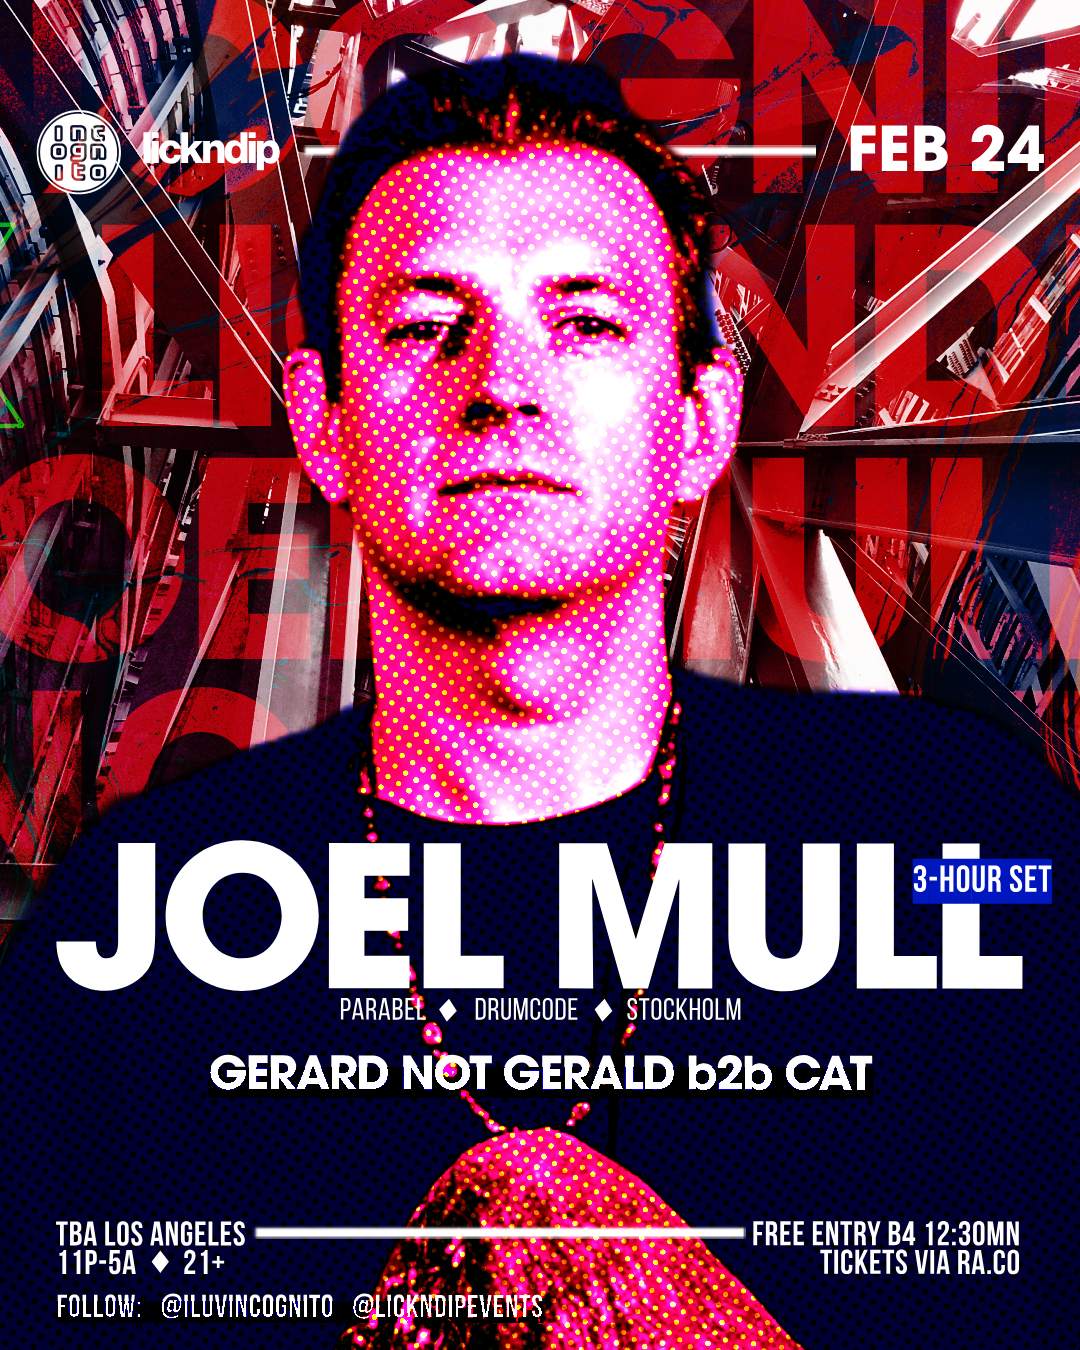 INCOGNITO x Lick N Dip with Joel Mull (3-Hour Set) plus Gerard Not Gerald b2b CAT - フライヤー表